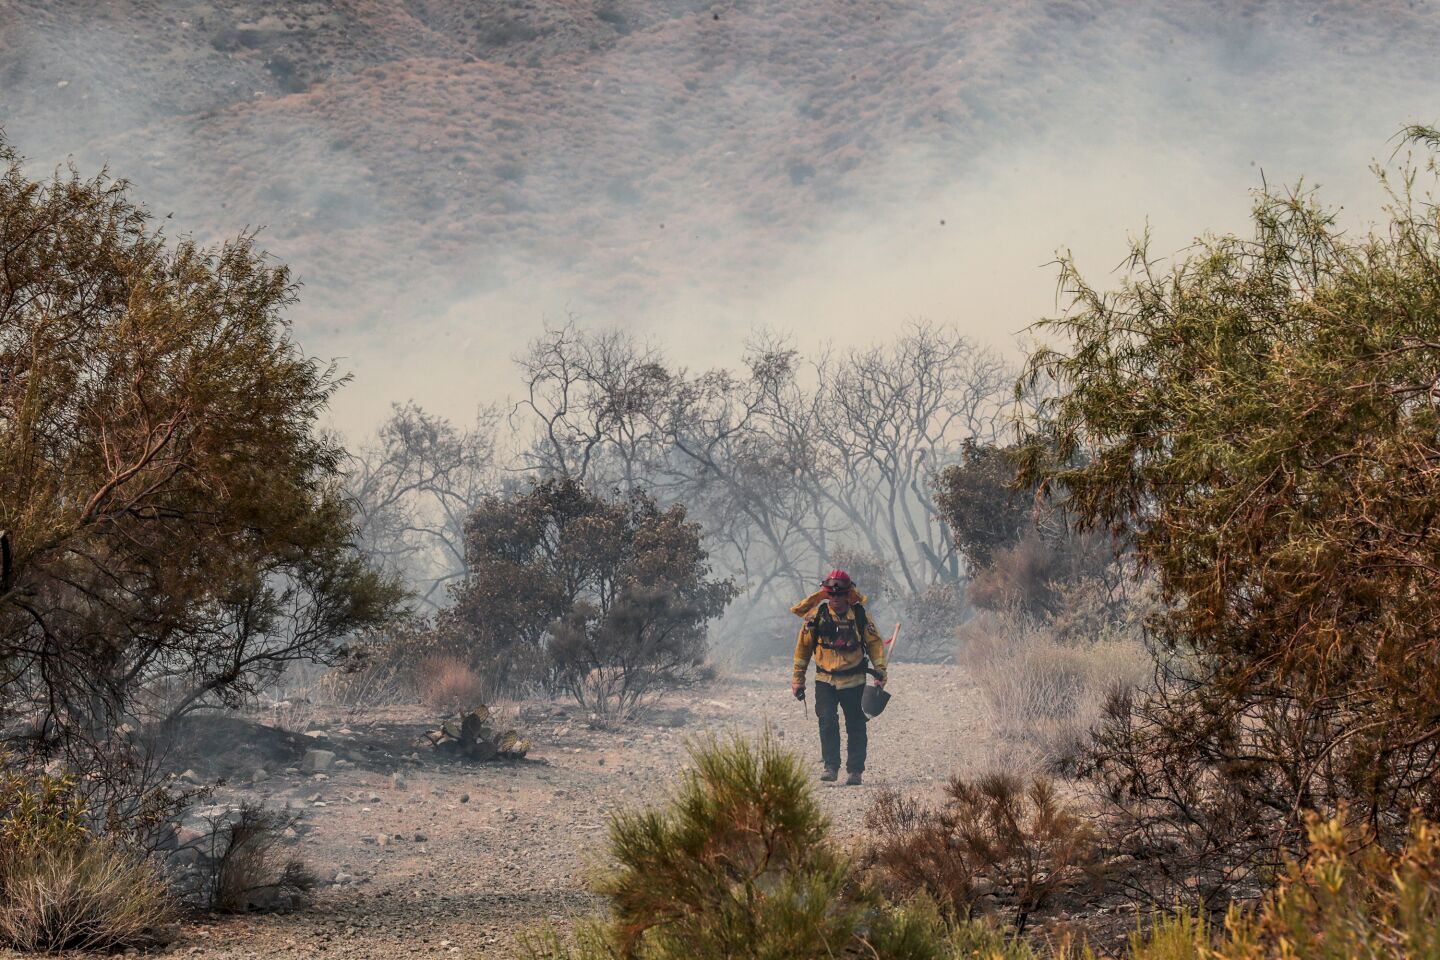 San Gorgonio Mtns, Sunday, August 2, 2020 - Smoldering brush remains after fire swept through the Whitewater Preserve Trail. (Robert Gauthier / Los Angeles Times)